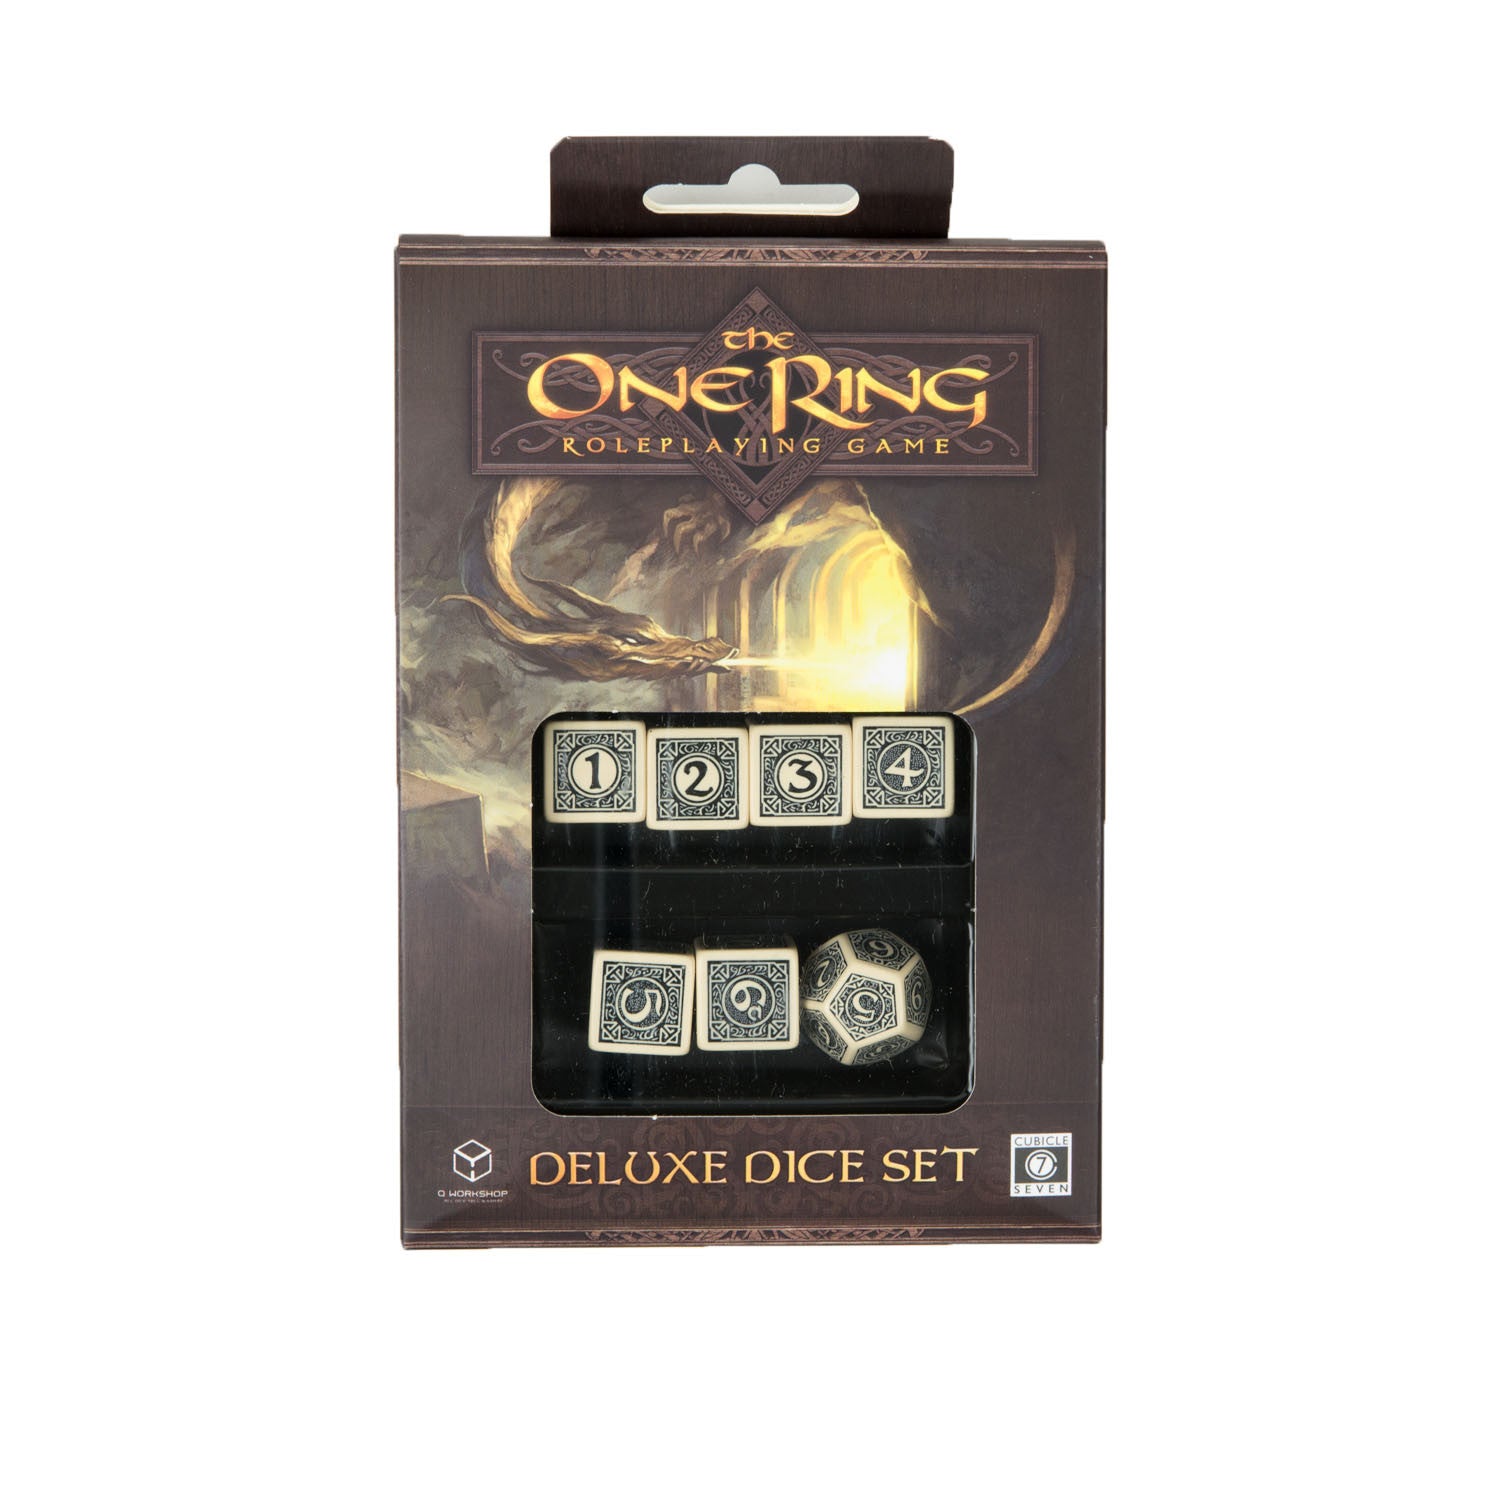 The One Ring RPG: Deluxe Dice Set